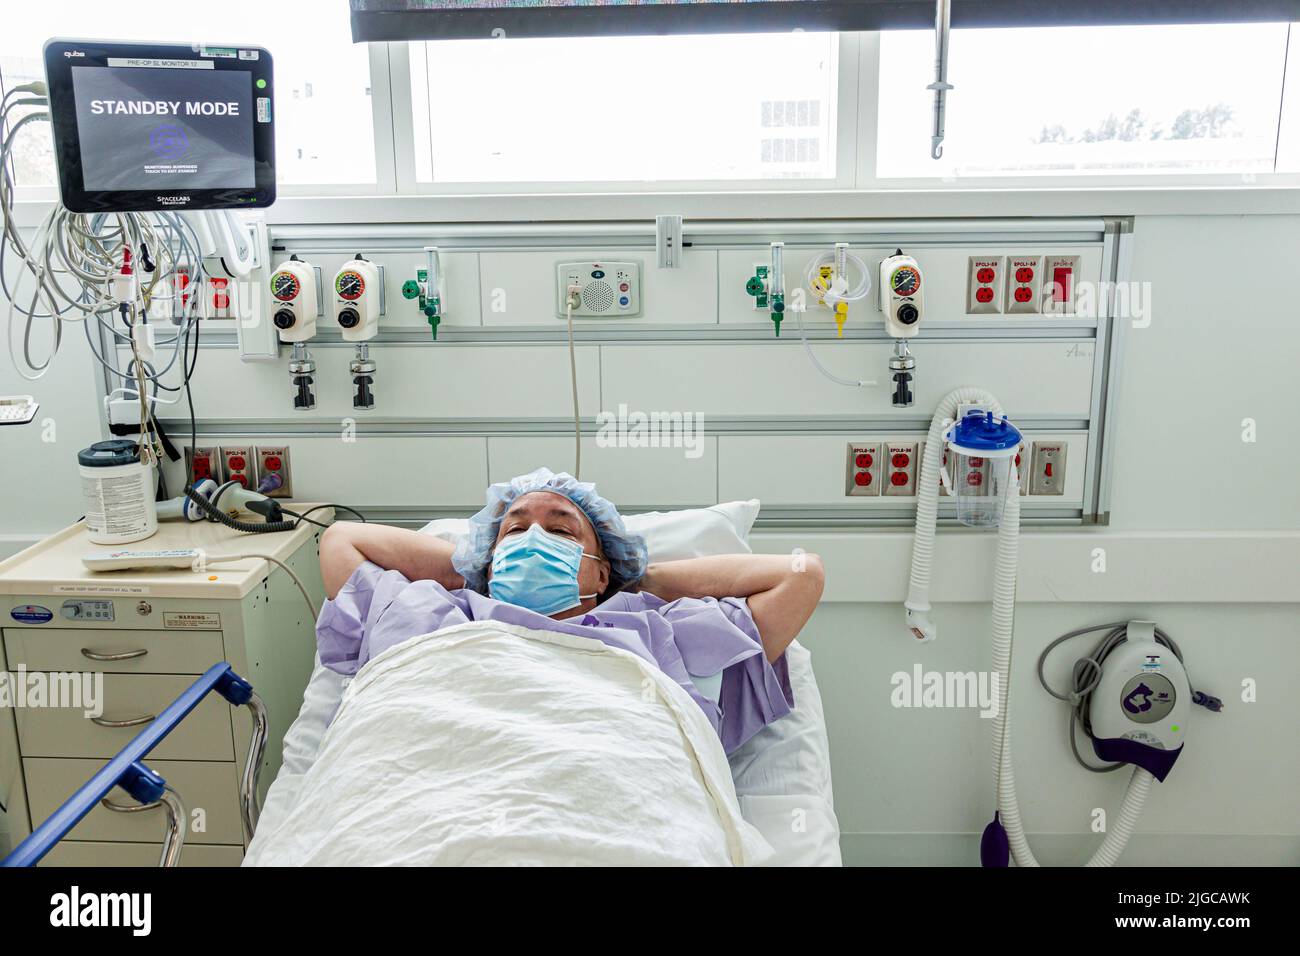 Miami Beach Florida,Mount Mt. Sinai Medical Center centre hospital inside interior,Skolnick Surgical Tower patient pre-op operating room monitor,Hispa Stock Photo